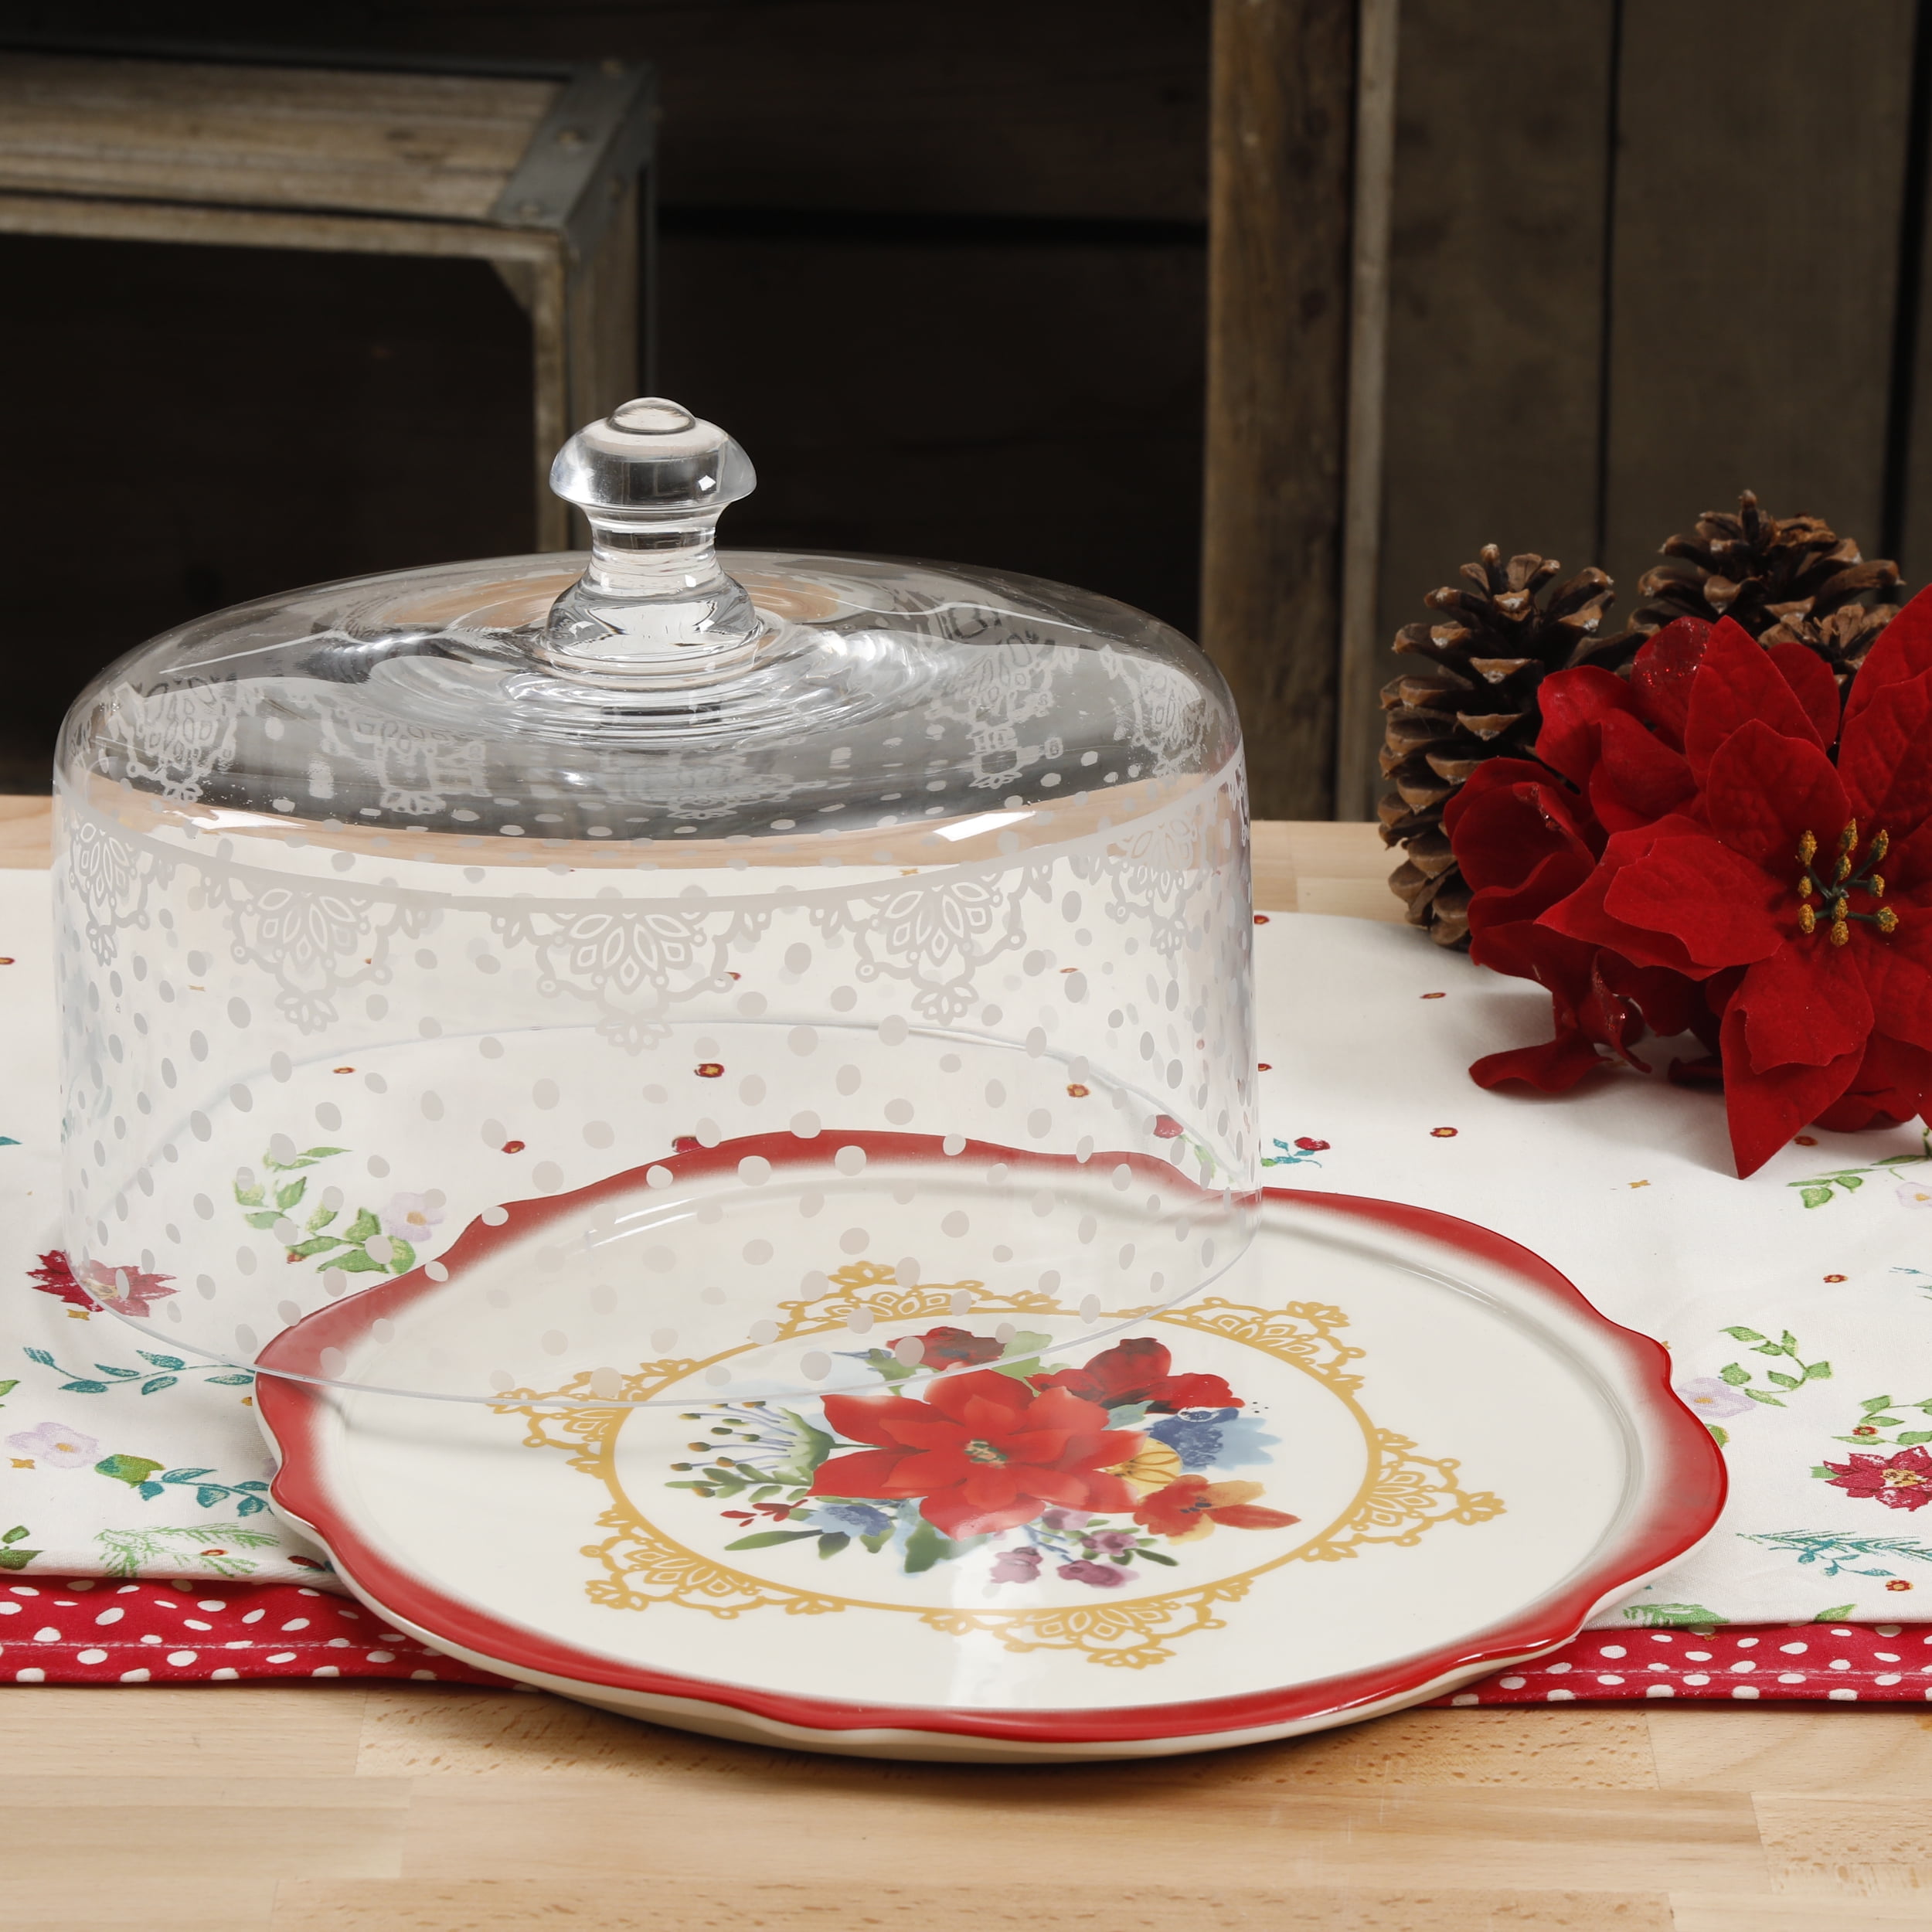 The Pioneer Woman Collection (@thepioneerwomancollection